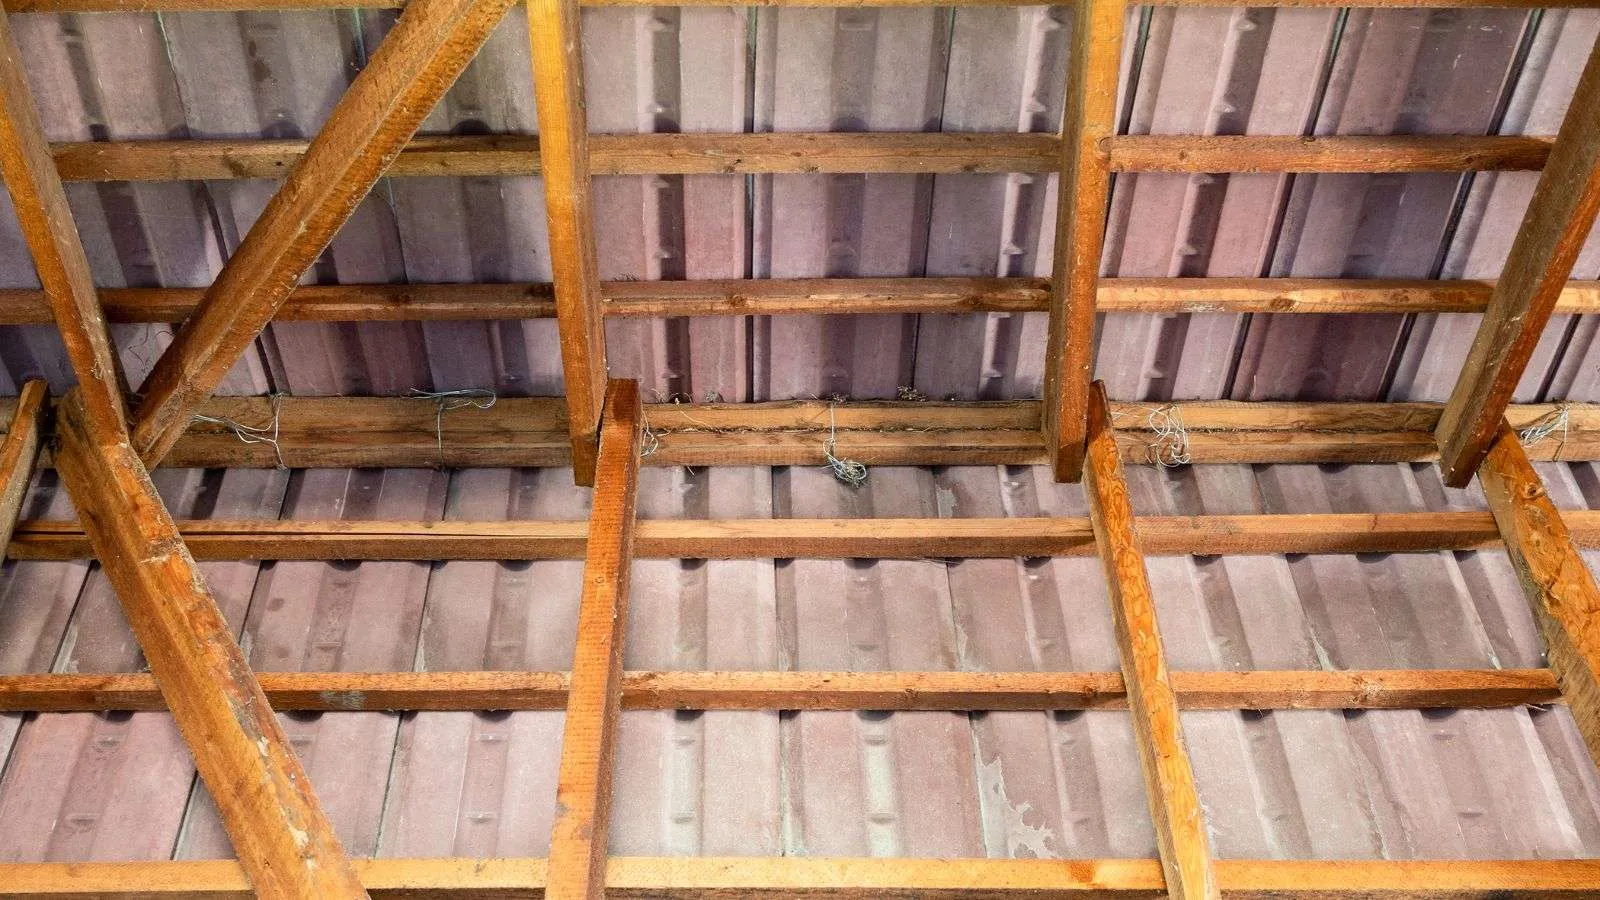 The correct spacing of purlins on metal roofs is essential for both the integrity and longevity of the roofing system. Misaligned or inaccurately spaced purlins can lead to structural issues, leaks, and decreased load capacity. In this article, we will dive into the guidelines and considerations necessary for optimal purlin spacing on metal roofs. Understanding Purlin Spacing on Metal Roofs To determine the appropriate purlin spacing on metal roofs, several factors must be considered, such as the expected loads on the roof, the type of metal roofing being used, and local building codes. Purlins should be spaced closer together in areas with heavy snow loads or where strong winds are common so that the roof's structural integrity can be maintained. For instance, in regions with heavy snowfall, purlins may need to be spaced around 2 feet apart to adequately support the weight of the snow. The type of metal roofing being used will influence the purlin spacing, as heavier roofing materials may require closer purlin spacing for support. Local building codes often provide guidelines on the minimum and maximum allowable purlin spacing based on factors like roof slope and expected loads. You have to follow these guidelines to ensure the safety and durability of the metal roof structure. 5 Essential Guidelines for Purlin Spacing 1. Consider Roof Load Requirements Determining the appropriate purlin spacing on metal roofs starts with considering the expected roof loads. Understanding the specific load requirements for your location, such as snow loads or wind loads, is crucial in establishing the ideal purlin spacing. Be sure to consult local building codes or a structural engineer to make sure the purlin spacing meets the necessary load-bearing criteria. Consider potential future changes in weather patterns or building usage when deciding on purlin spacing to guarantee long-term structural integrity. 2. Account for Roofing Material Weight Different types of metal roofing materials have varying weights, which can impact the required purlin spacing. Heavier roofing materials will necessitate closer purlin spacing to adequately support the weight of the roof. When selecting metal roofing for your project, be mindful of the material's weight and consult with the manufacturer or a construction professional to determine the optimal purlin spacing for your specific roofing material. 3. Optimize for Structural Stability Achieving structural stability is paramount when determining purlin spacing on metal roofs. To enhance the overall stability of the roof structure, consider reinforcing purlin connections at critical points such as intersections and edges. Implementing diagonal bracing or cross-bracing between purlins can further enhance structural rigidity and prevent roof movement or distortion under varying loads. Prioritize structural stability for the longevity and safety of your metal roof. 4. Follow Manufacturer Recommendations Consulting the manufacturer's guidelines and recommendations for purlin spacing is essential to guaranteeing the proper installation and performance of your metal roof. Manufacturers often provide specific instructions regarding purlin spacing based on the design and specifications of their roofing products. Adhering to these recommendations will not only ensure compliance with warranty terms but also optimize the functionality and longevity of the metal roof system. 5. Regular Maintenance and Inspection After installing a metal roof with the recommended purlin spacing, it's best to perform regular maintenance and inspections to detect any issues early on and prevent potential damage. Inspect the roof periodically for signs of corrosion, loose fasteners, or purlin deflection, as these issues can compromise the integrity of the roof structure. Dealing with maintenance concerns quickly and conducting routine inspections will extend the lifespan of your metal roof and maximize its performance over time. The Impact of Roof Pitch on Purlin Spacing The roof pitch plays a significant role in determining the purlin spacing on metal roofs, influencing both the structural integrity and aesthetic appeal of the roof. For roofs with a steeper pitch, the purlin spacing may need to be closer to accommodate the increased gravitational forces acting on the roof surface. Steeper roof pitches result in a more vertical load on the purlins due to gravity, requiring tighter spacing for adequate support and stability. Conversely, roofs with a shallower pitch can typically have wider purlin spacing since the gravitational load is spread out more horizontally. It is essential to consider the roof pitch when determining purlin spacing to get the right weight distribution, structural support, and overall functionality of the metal roof system. Calculating the Maximum Span for Purlins on Your Metal Roof Determine the required load capacity. Begin by evaluating the expected loads on your metal roof, such as snow loads or wind loads, based on your location and local building codes. Consider any additional loads, like HVAC units or solar panels, that may impact the purlin span requirements. For example, in areas with heavy snowfall, you may need to account for higher snow loads when calculating the maximum span for purlins. Select Appropriate Purlin Material and Size: Choose purlins that are suitable for the expected loads and span requirements of your metal roof. Consider factors such as material strength, corrosion resistance, and compatibility with your roofing system. For instance, galvanized steel purlins are commonly used for their durability and load-bearing capacity. Consult load span tables or structural engineers. Utilize load span tables provided by purlin manufacturers to determine the maximum allowable span for the selected purlin material and size. Alternatively, seek guidance from structural engineers to calculate the maximum span based on the specific design requirements of your metal roof. These resources will help make sure the purlins can adequately support the roof loads over the desired span. Account for Roof Pitch and Roofing Material Weight: Adjust the calculated maximum span based on the roof pitch and the type of metal roofing material being used. Steeper roof pitches and heavier roofing materials may require shorter purlin spans to accommodate the increased gravitational forces. Just make sure that the purlin spacing aligns with the roof pitch and roofing material weight to maintain structural integrity. Consider Purlin Spacing and Connection Details: Determine the appropriate spacing between purlins based on the calculated maximum span, load requirements, and structural stability considerations. Pay attention to the connection details between purlins and roof components to ensure secure attachment and distribution of loads. Implement proper bracing and fastening techniques to enhance the overall strength of the roof structure. Common Mistakes to Avoid in Purlin Installation Improper Purlin Spacing: One common mistake to avoid is improper purlin spacing, which can lead to insufficient support for the metal roof and compromise its structural integrity. Just make sure that the purlins are spaced according to manufacturer recommendations, taking into account factors such as roof loads, roofing material weight, and roof pitch. Incorrect spacing can result in purlins deflecting under load, causing issues like sagging or buckling in the roof system. Neglecting Connection Details: Neglecting proper connection details between purlins and other roof components is another critical error to avoid during installation. Secure and correctly install purlin connections using appropriate fasteners and bracing techniques to ensure stability and load distribution. Failing to address connection details can lead to weak points in the roof structure, increasing the risk of failure during extreme weather conditions or over time. Ignoring Manufacturer Guidelines: Disregarding manufacturer guidelines and recommendations for purlin installation can result in subpar performance and potential safety hazards. Always follow the manufacturer's instructions regarding purlin material, size, spacing, and installation methods to guarantee the longevity and functionality of the metal roof system. Manufacturer guidelines provide essential information tailored to specific roofing products, ensuring proper installation practices are followed. Lack of Regular Maintenance: Overlooking regular maintenance and inspections of the metal roof after purlin installation is a mistake that can shorten the roof's lifespan and lead to costly repairs. Schedule routine inspections to check for signs of corrosion, loose fasteners, or purlin deflection, addressing any issues immediately to prevent further damage. Implementing a proactive maintenance plan will extend the durability and performance of the metal roof over time. The Role of Purlins in Overall Roof Strength and Stability Purlins play a big role in enhancing the overall strength and stability of a metal roof by providing structural support and load distribution. Positioned horizontally across the rafters or trusses, purlins help to transfer the weight of the roof system, including live loads such as snow or wind, to the vertical supports. Purlins help the roof stand up to outside forces and keep the structure from breaking by spreading out the weight evenly and easing the stress on each part of the roof. Purlins assist in maintaining the shape and alignment of the roof, preventing deflection, and ensuring a uniform load-bearing capacity across the structure. Properly designed and installed purlins are essential for reinforcing the roof system and enhancing its overall durability and stability. Material Choices for Purlins and Their Impact on Spacing Consider Material Strength and Weight: The choice of material for purlins significantly impacts the spacing requirements on a metal roof. Opt for materials with adequate strength to support the intended loads without excessive deflection. For example, steel purlins are commonly used for their high strength-to-weight ratio, allowing for longer spans between supports compared to timber purlins. Evaluate Corrosion Resistance: Selecting purlin materials with good corrosion resistance is essential for maintaining the structural integrity of the roof system over time. Materials like galvanized steel or aluminum, which offer superior corrosion resistance properties, can withstand harsh weather conditions and environmental exposure, reducing the need for frequent maintenance and replacement. Assess Thermal Conductivity: Consider the thermal conductivity of the purlin material, as it can impact the energy efficiency and insulation properties of the roof. Materials with high thermal conductivity may contribute to heat loss or gain through the roof structure, affecting the overall energy performance of the building. Opting for materials with lower thermal conductivity can help improve the thermal efficiency of the roof system. Evaluate Long-Term Durability: Choose purlin materials that exhibit long-term durability and resistance to degradation over time. Materials that are prone to warping, rotting, or decay can compromise the structural stability of the roof and require frequent maintenance or replacement. Investing in durable materials like treated steel or composite purlins can help with a longer lifespan for the roof system with minimal upkeep. How Weather Conditions Influence Purlin Spacing and Placement Weather conditions have a significant impact on purlin spacing and placement in metal roof installations, affecting both structural integrity and performance. Regions prone to heavy snow loads may require closer purlin spacing to adequately support the weight of accumulated snow and prevent roof deformation or collapse. In areas with high wind loads, purlins may need to be strategically placed to resist uplift forces and ensure the roof's stability during storms. Extreme temperature variations can influence the thermal expansion and contraction of the roof system, necessitating considerations for purlin placement to accommodate potential movement without compromising the roof's structural integrity. Adjusting Purlin Spacing for Different Types of Metal Roofs Consider Roofing Material Weight: Different types of metal roofing materials have varying weights, influencing the required purlin spacing. Heavier roofing materials, such as steel panels, may necessitate closer purlin spacing to adequately support the increased weight compared to lighter materials like aluminum. Adjusting purlin spacing based on the specific weight characteristics of the chosen metal roofing material ensures proper load distribution and structural stability. Account for Roof Slope and Pitch: The slope and pitch of the roof impact how loads are distributed, affecting the optimal purlin spacing for different types of metal roofs. Steeper roof slopes concentrate more weight vertically, requiring closer purlin spacing to support the gravitational forces effectively. In contrast, roofs with shallower pitches disperse loads more horizontally, allowing for wider purlin spacing while maintaining structural integrity. Consider Roof Configuration and Design: The design and configuration of the metal roof, such as its shape, size, and intended use, can influence purlin spacing requirements. Complex roof designs with irregular shapes or multiple levels may necessitate varied purlin spacing to accommodate load-bearing needs across different sections of the roof. Customized purlin placement based on the specific roof configuration ensures uniform support and stability throughout the structure. Consult Manufacturer Guidelines: Manufacturers of metal roofing products often provide recommendations on purlin spacing based on the design and specifications of their materials. Following manufacturer guidelines makes sure that the purlin spacing aligns with the structural requirements of the specific metal roof product, optimizing performance and longevity. Consulting these guidelines helps tailor purlin spacing to the unique characteristics of different types of metal roofs, enhancing overall system efficiency. Cost Implications of Purlin Spacing Decisions Decisions regarding purlin spacing in metal roof installations can have significant cost implications, impacting both material expenses and installation costs. Closer purlin spacing typically requires more purlins, fasteners, and labor for installation, resulting in higher material and labor costs. For example, reducing purlin spacing from 5 feet to 3 feet might increase material costs by approximately $0.50 to $1 per square foot of roof area due to the additional purlins and fasteners required. Conversely, wider purlin spacing can reduce material and labor costs but may compromise structural integrity and longevity if not appropriately designed. Balancing cost considerations with structural requirements is the key to optimizing the overall cost-effectiveness and performance of the metal roof system. Engineering Considerations for Purlin Spacing in Commercial Projects In commercial projects, engineering considerations for purlin spacing play a vital role in ensuring the structural integrity and longevity of the metal roof system. Engineers must assess the expected loads on the roof, including live loads such as snow accumulation or equipment installations, to determine the appropriate purlin spacing for optimal support. Factors like roof slope, roofing material weight, and local building codes are carefully evaluated to design purlin layouts that can withstand anticipated loads and environmental conditions. For instance, in a large commercial warehouse with heavy equipment stored on the roof, engineers may recommend closer purlin spacing to accommodate the additional weight and ensure stability. Innovations in Purlin Design and Installation Techniques Recent innovations in purlin design and installation techniques have revolutionized the construction industry, offering enhanced efficiency, durability, and flexibility in metal roof systems. Advanced materials, such as composite purlins combining steel and other materials, provide improved strength-to-weight ratios and corrosion resistance. Innovations in adjustable purlin systems allow for easier customization and quick installation, reducing labor costs and construction time. The development of pre-engineered purlin solutions with integrated insulation or solar panel mounting features streamlines the installation process and enhances energy efficiency in commercial and industrial projects. These innovative designs and techniques not only optimize structural performance but also contribute to sustainable building practices by promoting resource efficiency and reducing environmental impact in modern construction projects.